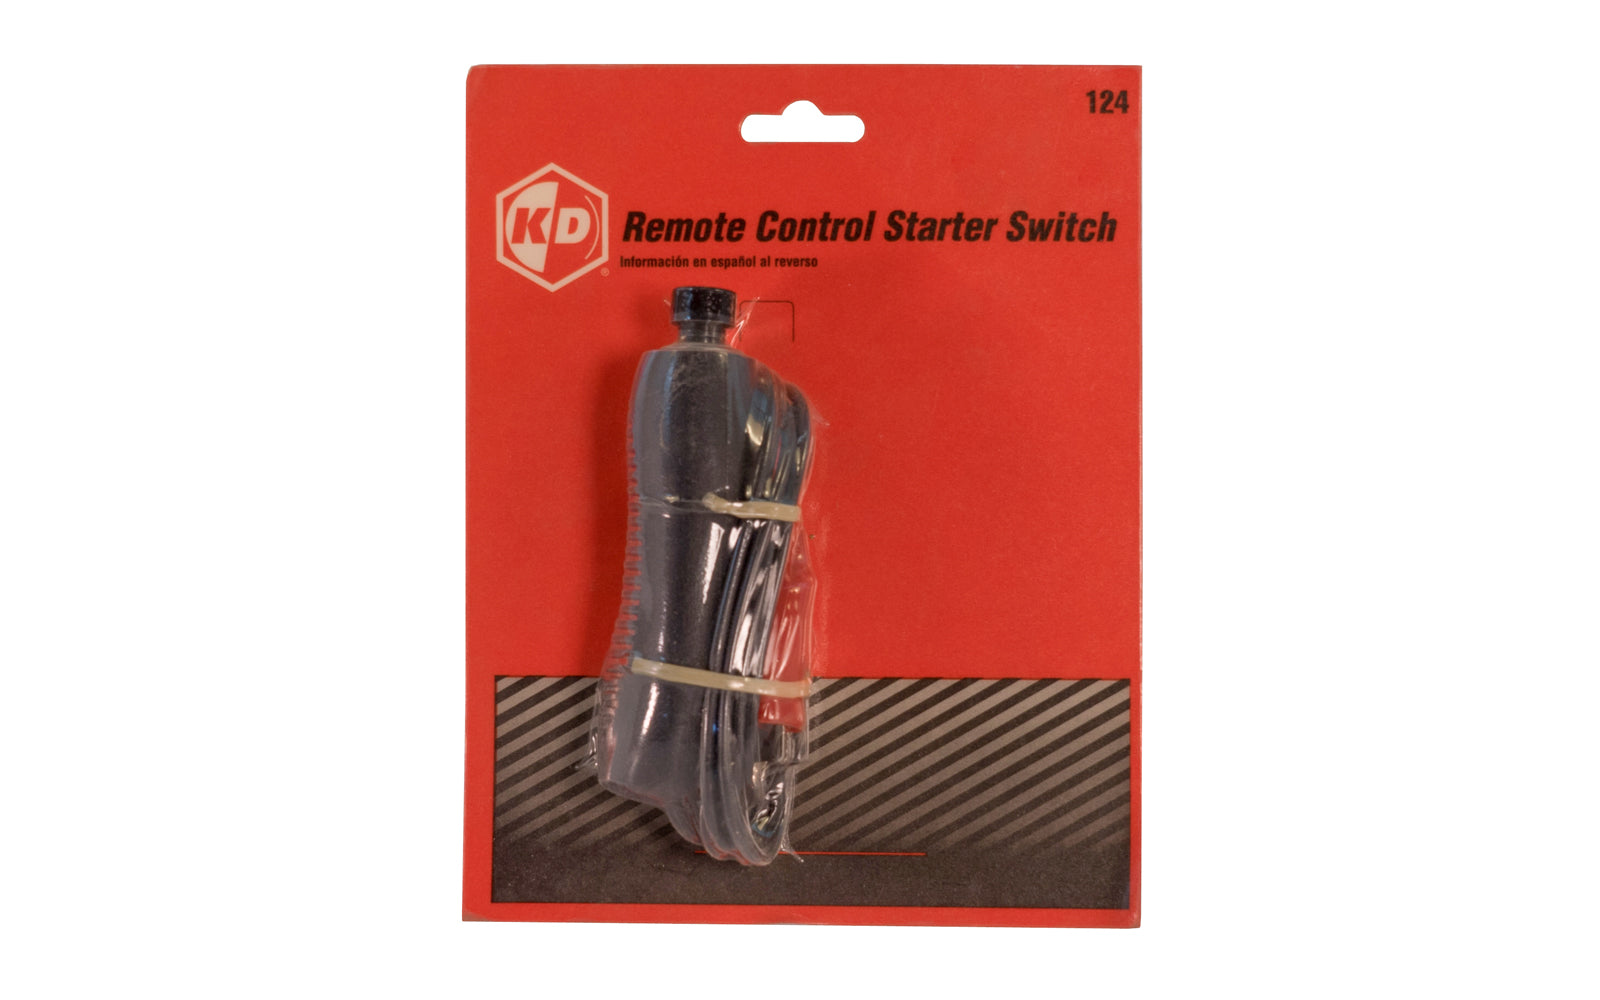 KD Tools Remote Control Starter Switch. KD Tools Model No. 124.